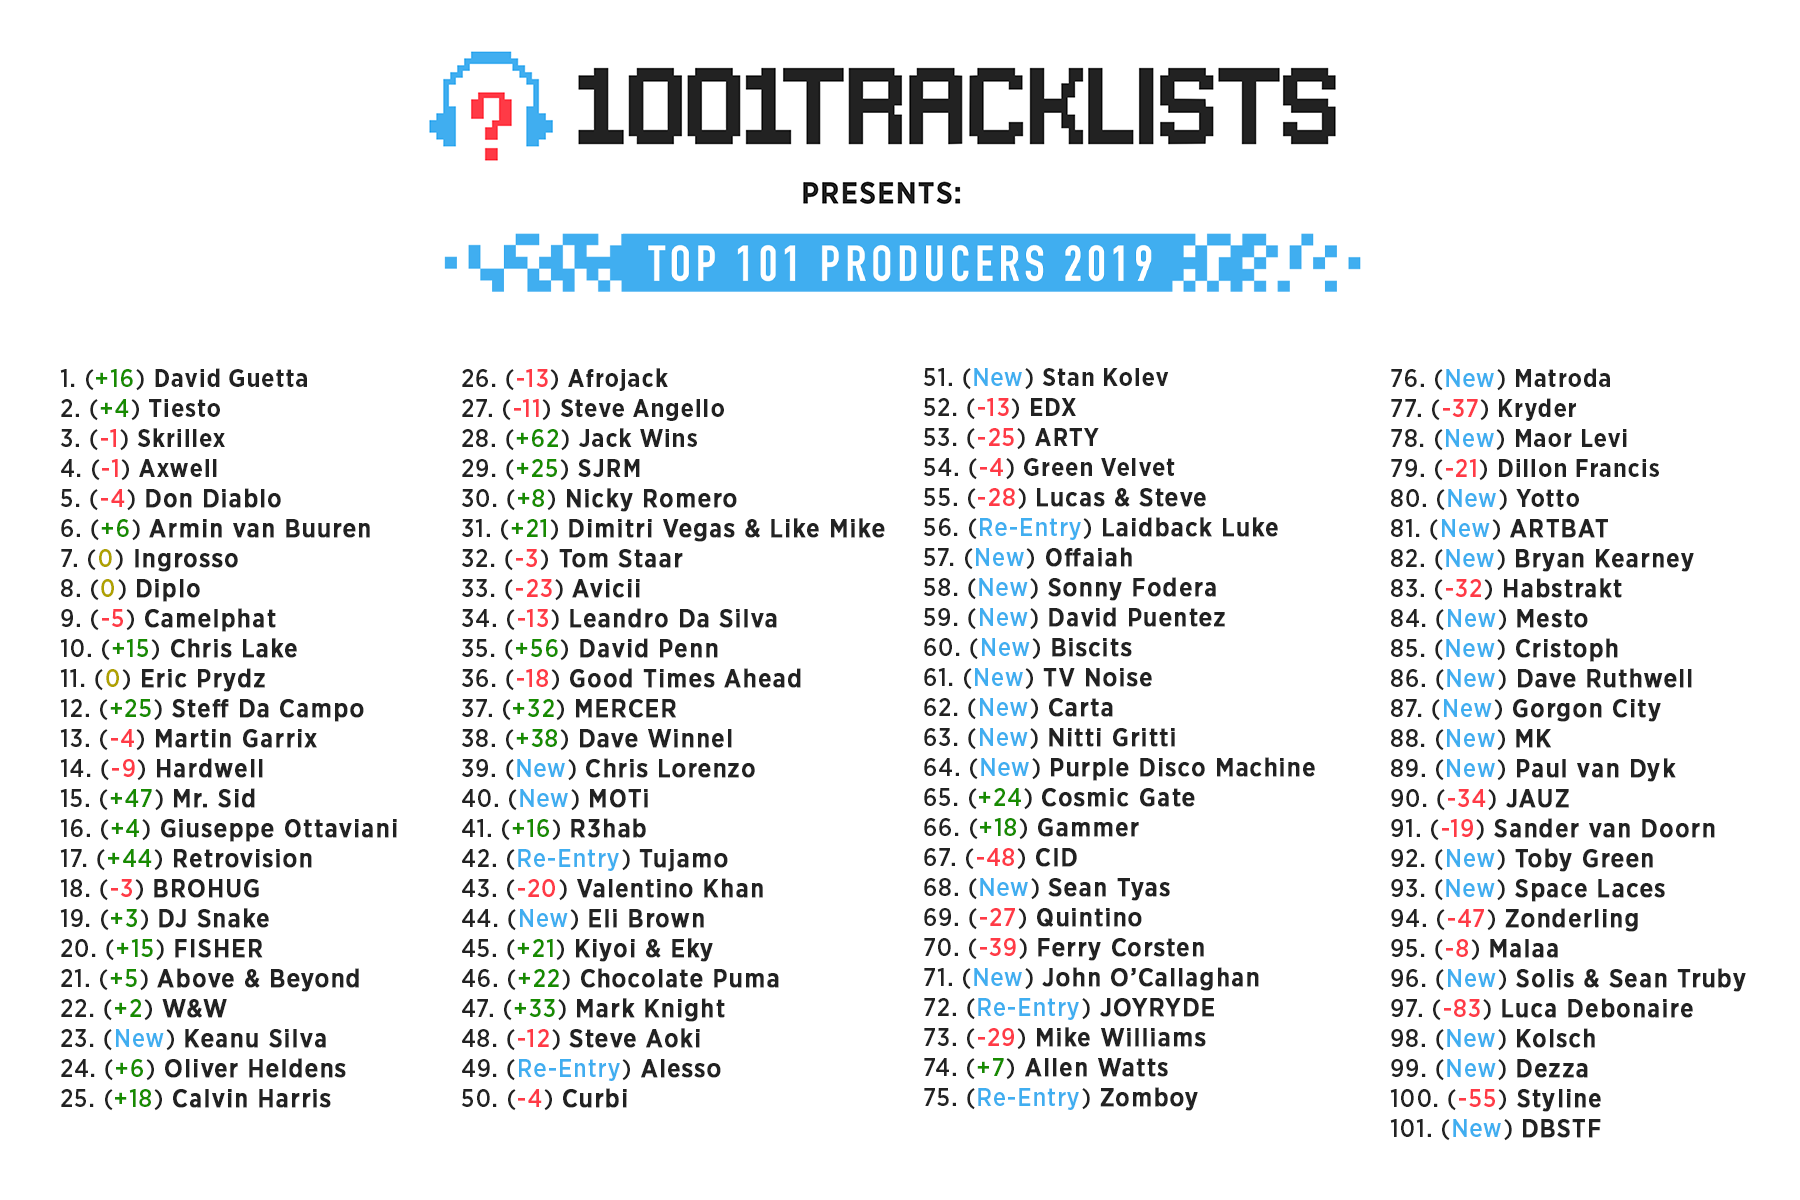 1001tracklists Reveals Top 101 Producers 2019 Your Edm The latest tweets from 1001tracklists (@1001tracklists). 1001tracklists reveals top 101